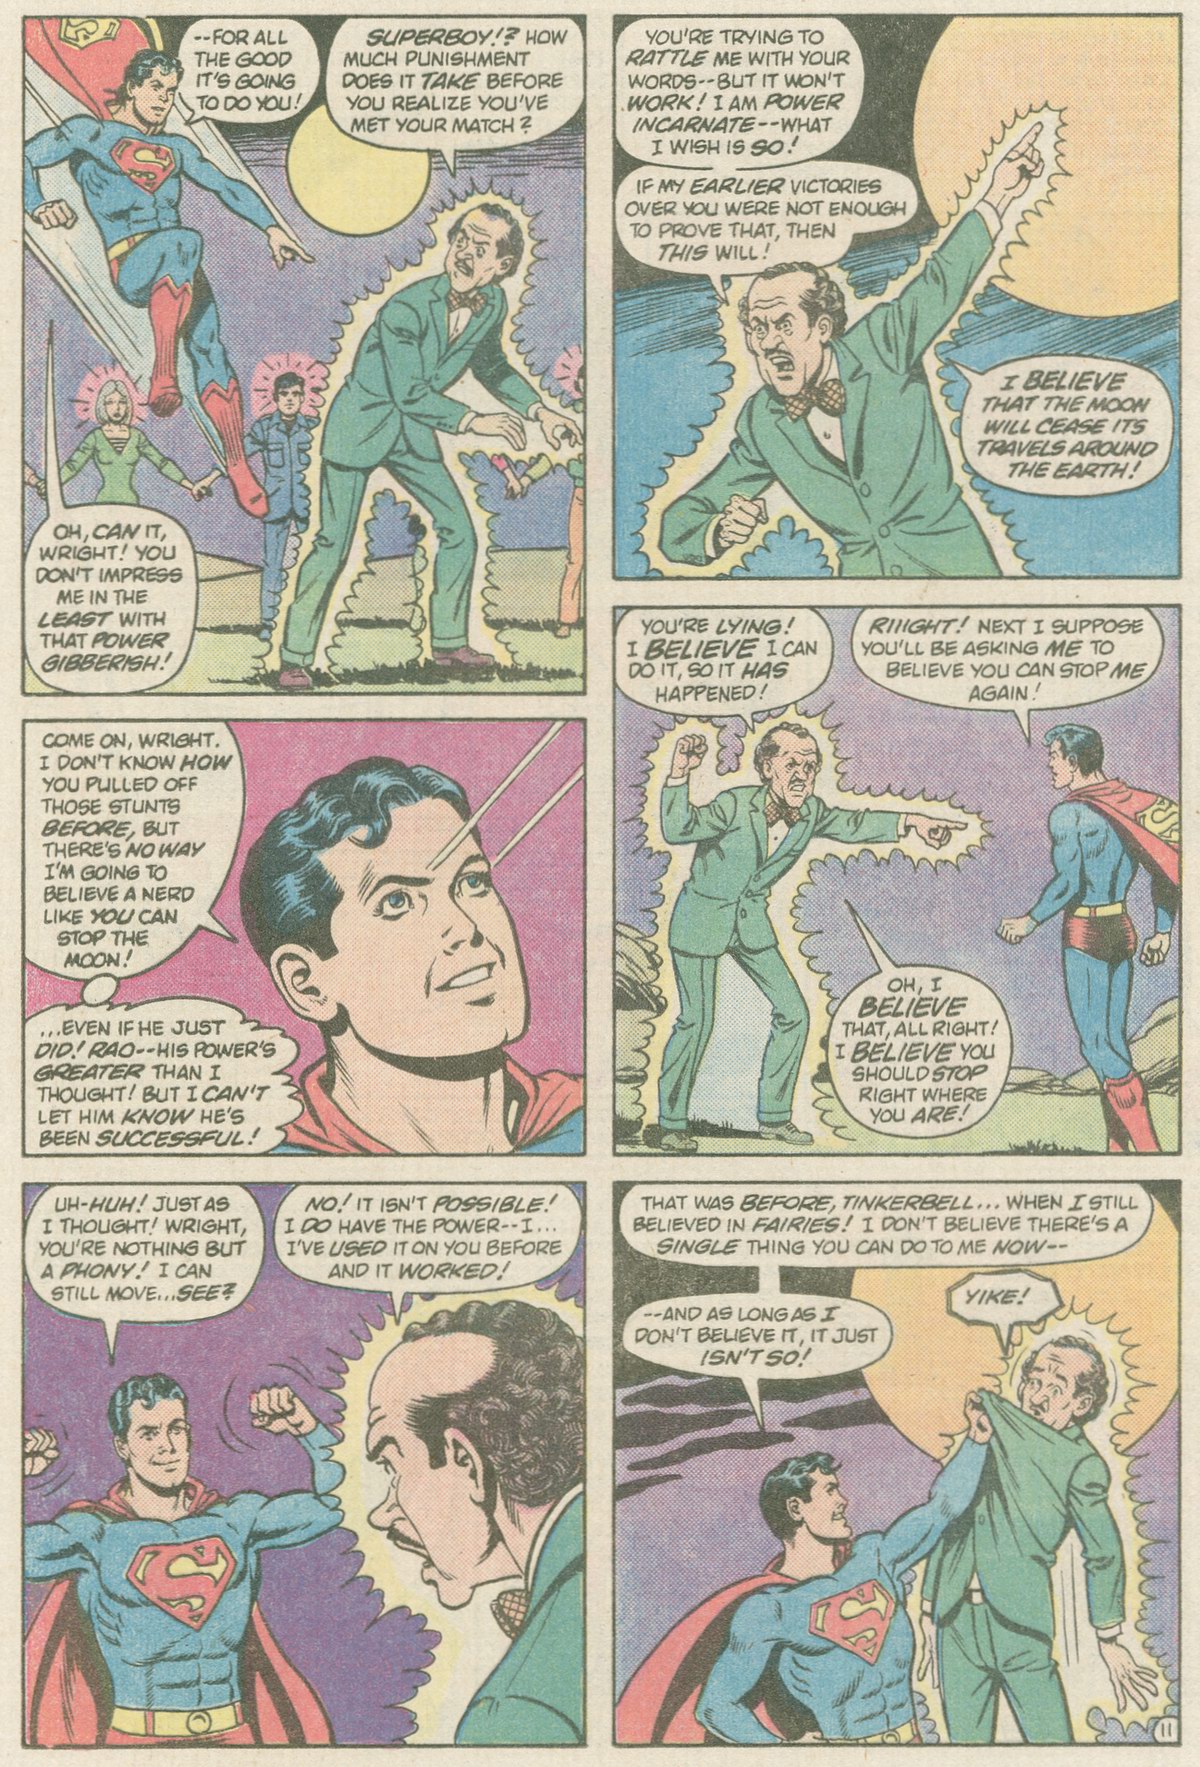 The New Adventures of Superboy 37 Page 11